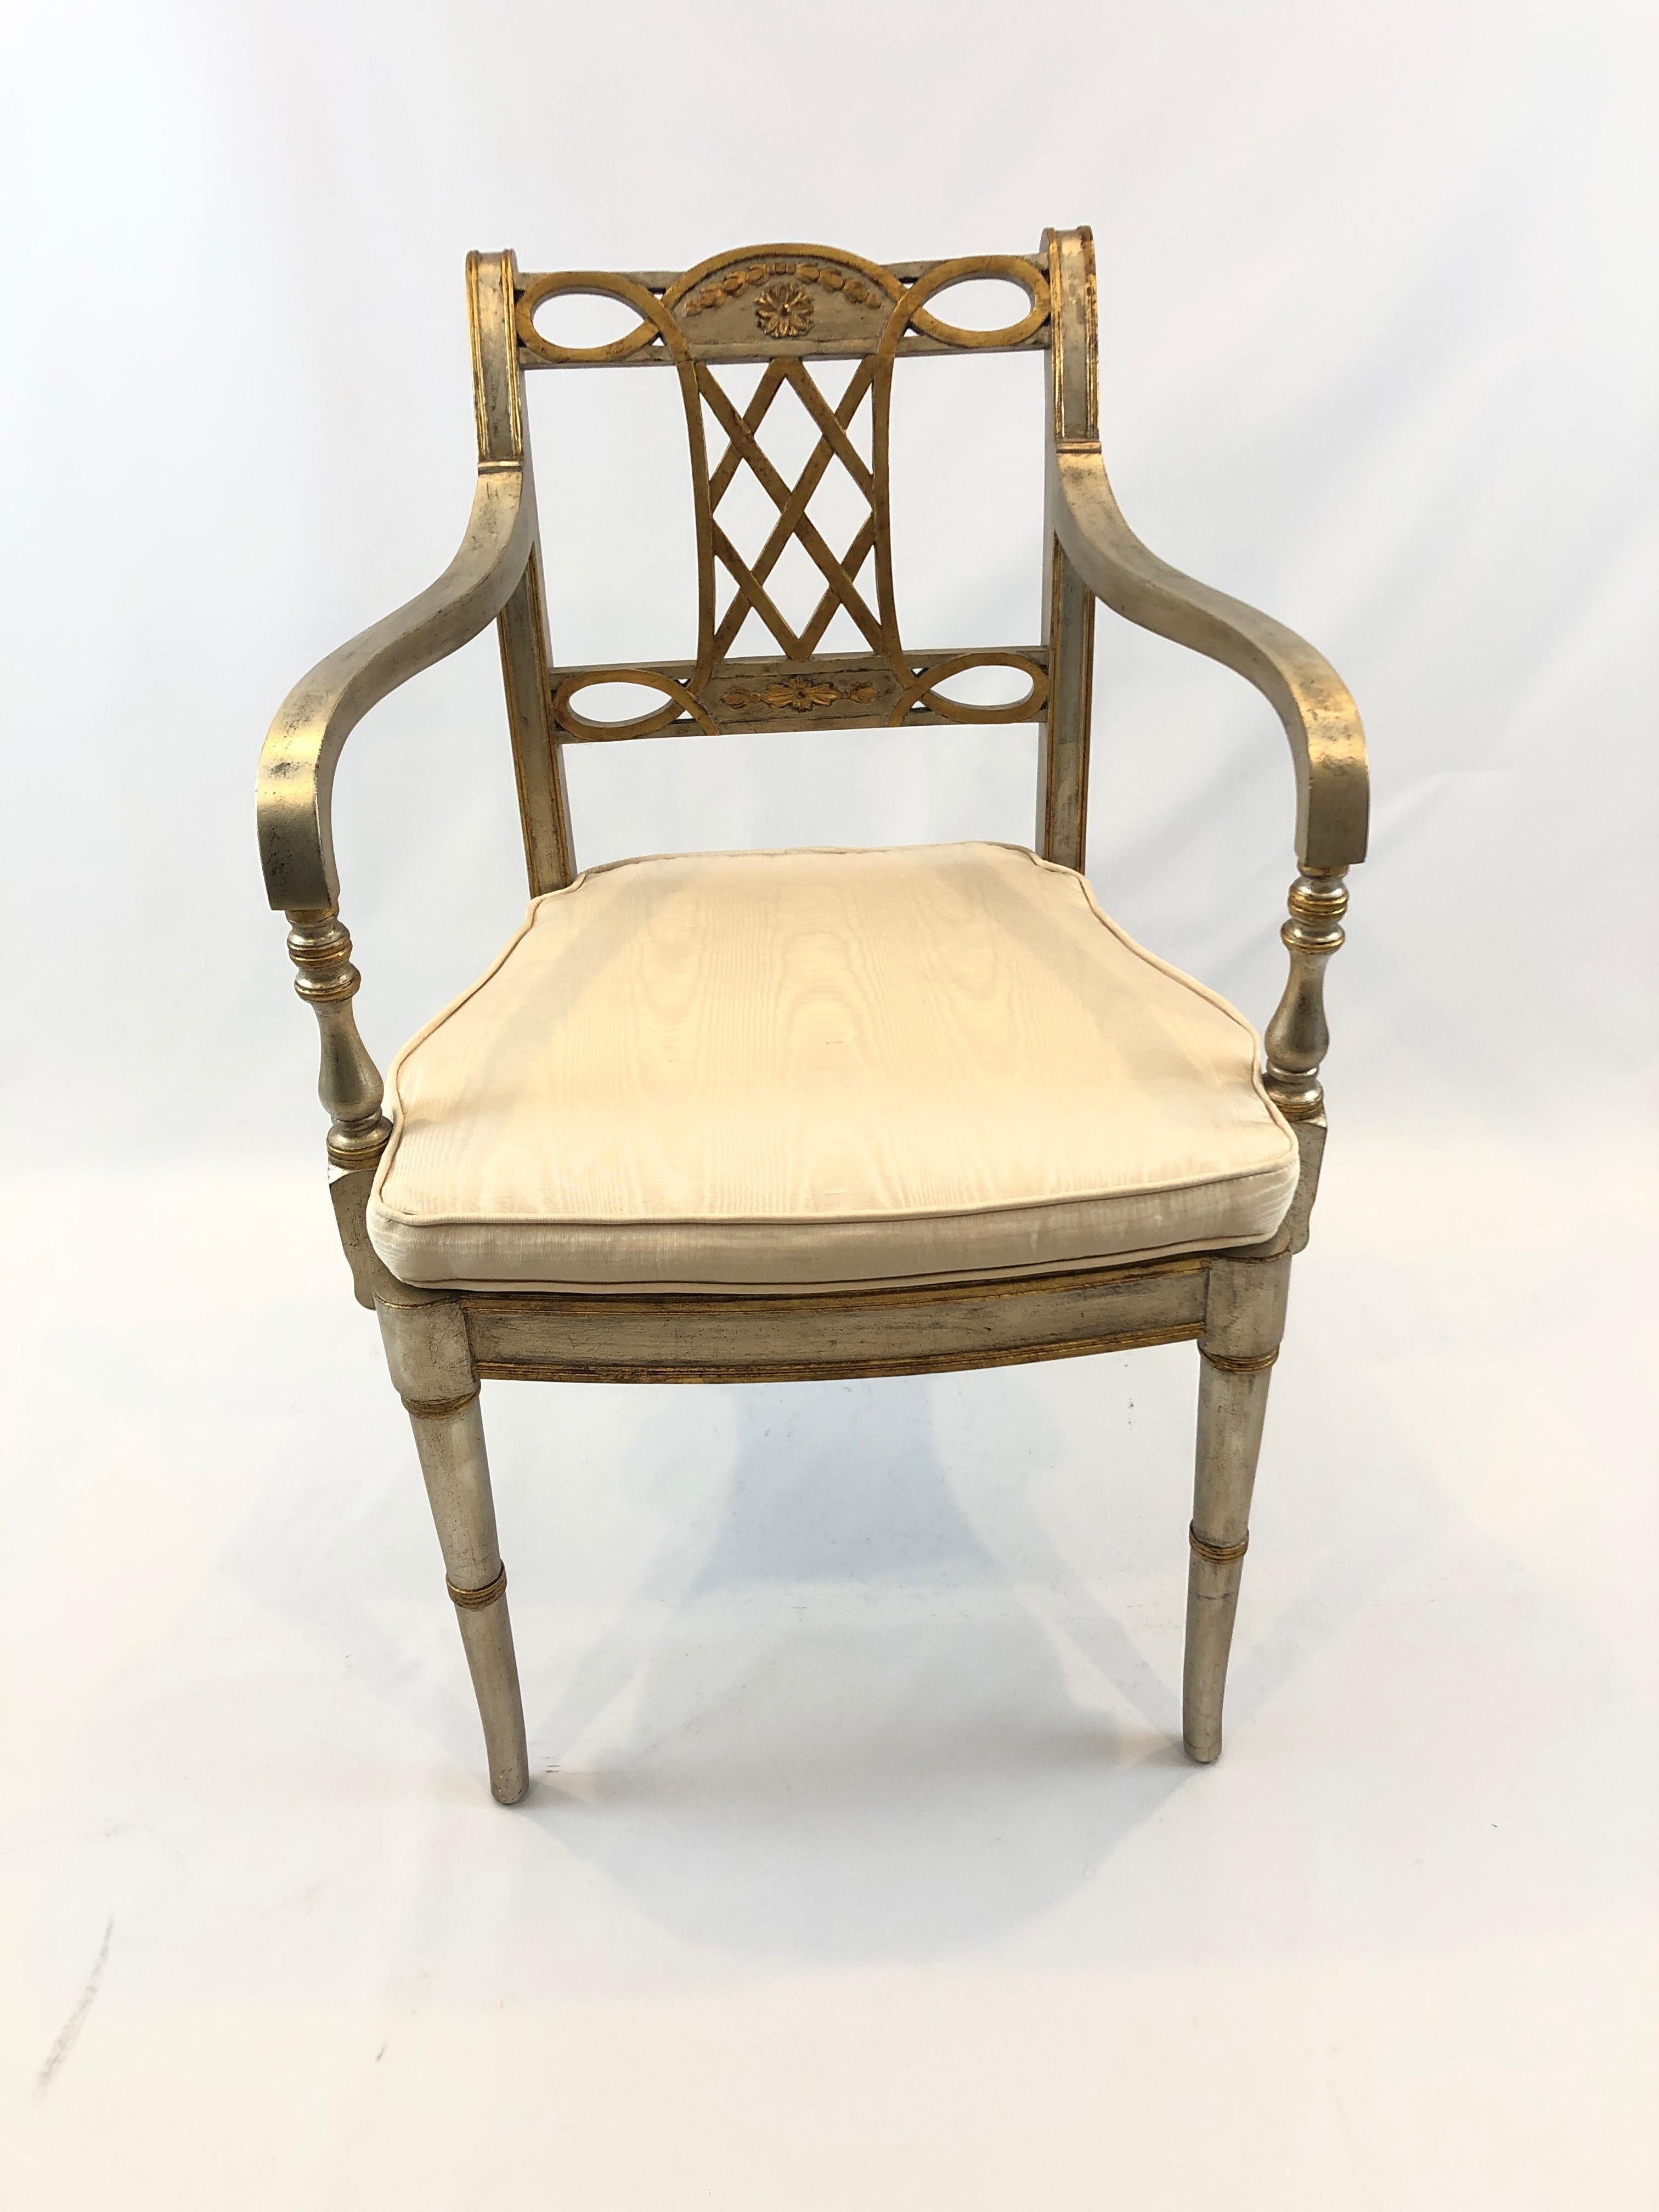 A very glamorous elegant armchair having silver and gold carved wood and caned seat, with a custom silk cream seat cushion and lovely floret and foliage decoration.
Measures: Seat height without cushion 17.5, with cushion 19.75
Arm height